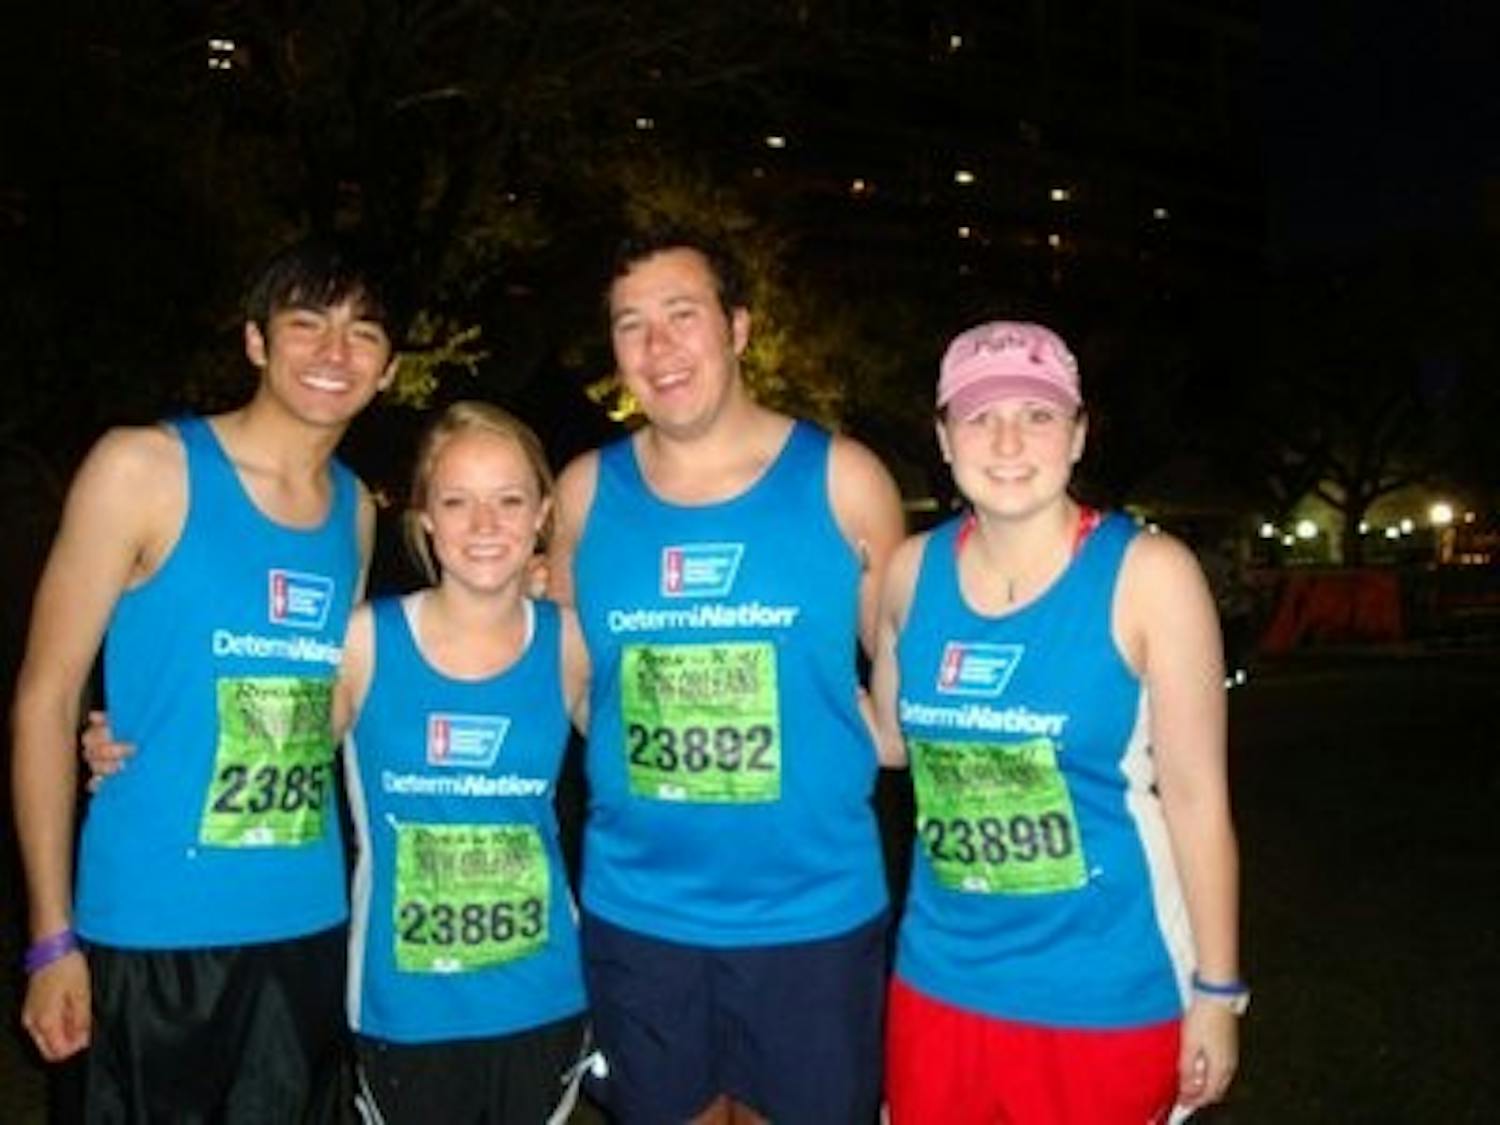 Taylor Kirk, far right, and others ran the American Cancer Society half marathon in New Orleans. (CONTRIBUTED)